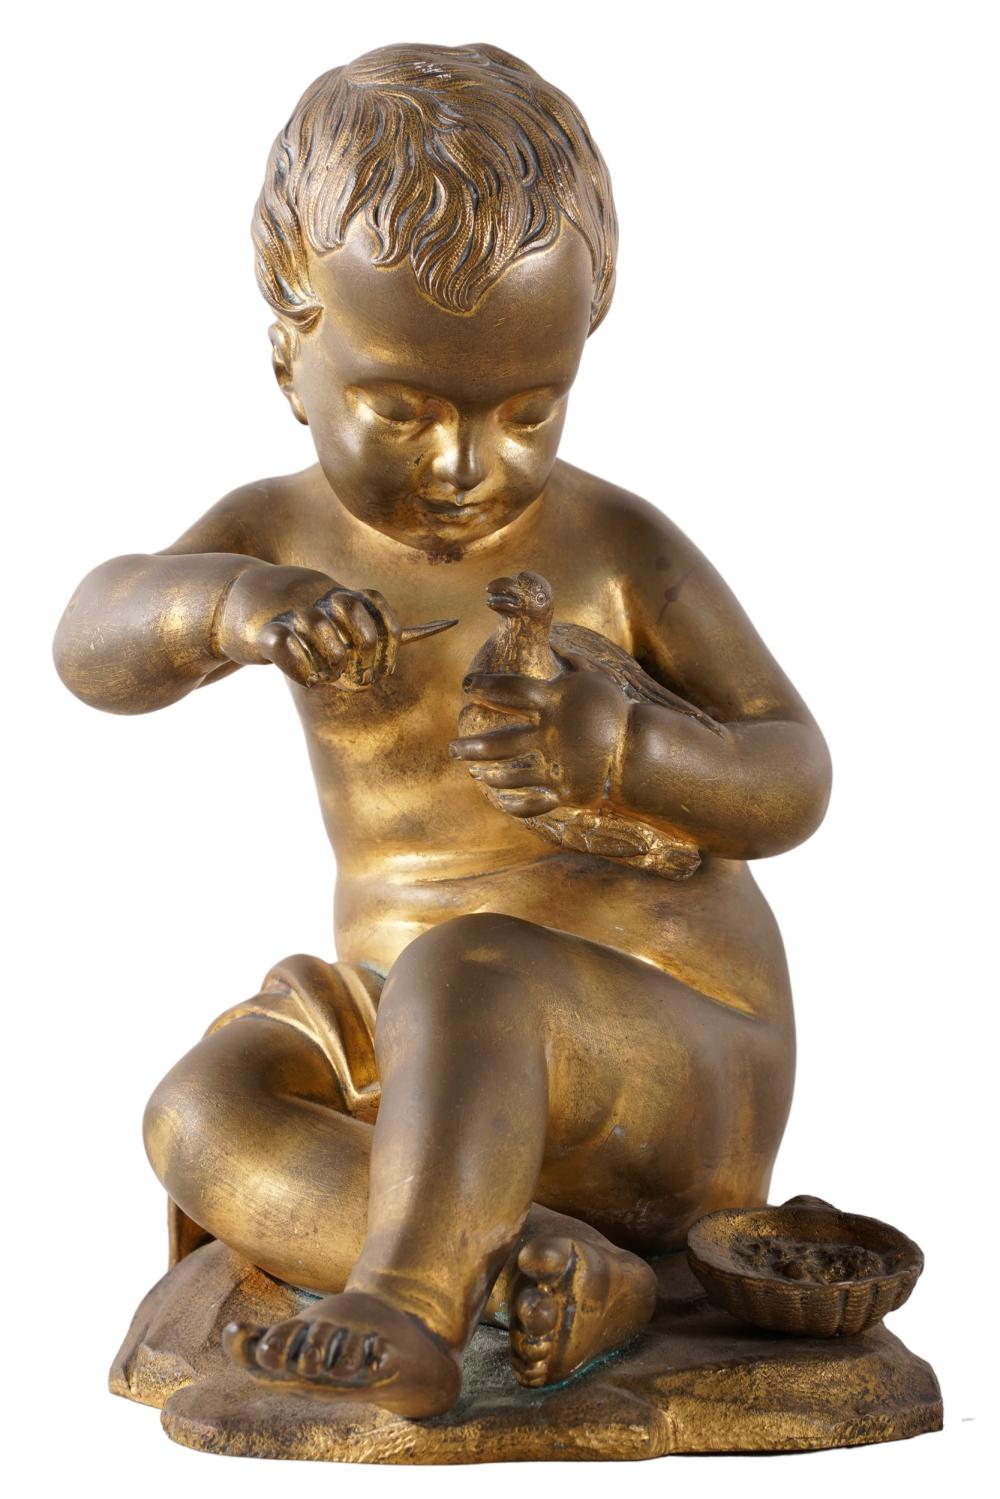 FRENCH GILT BRONZE FIGURE OF A